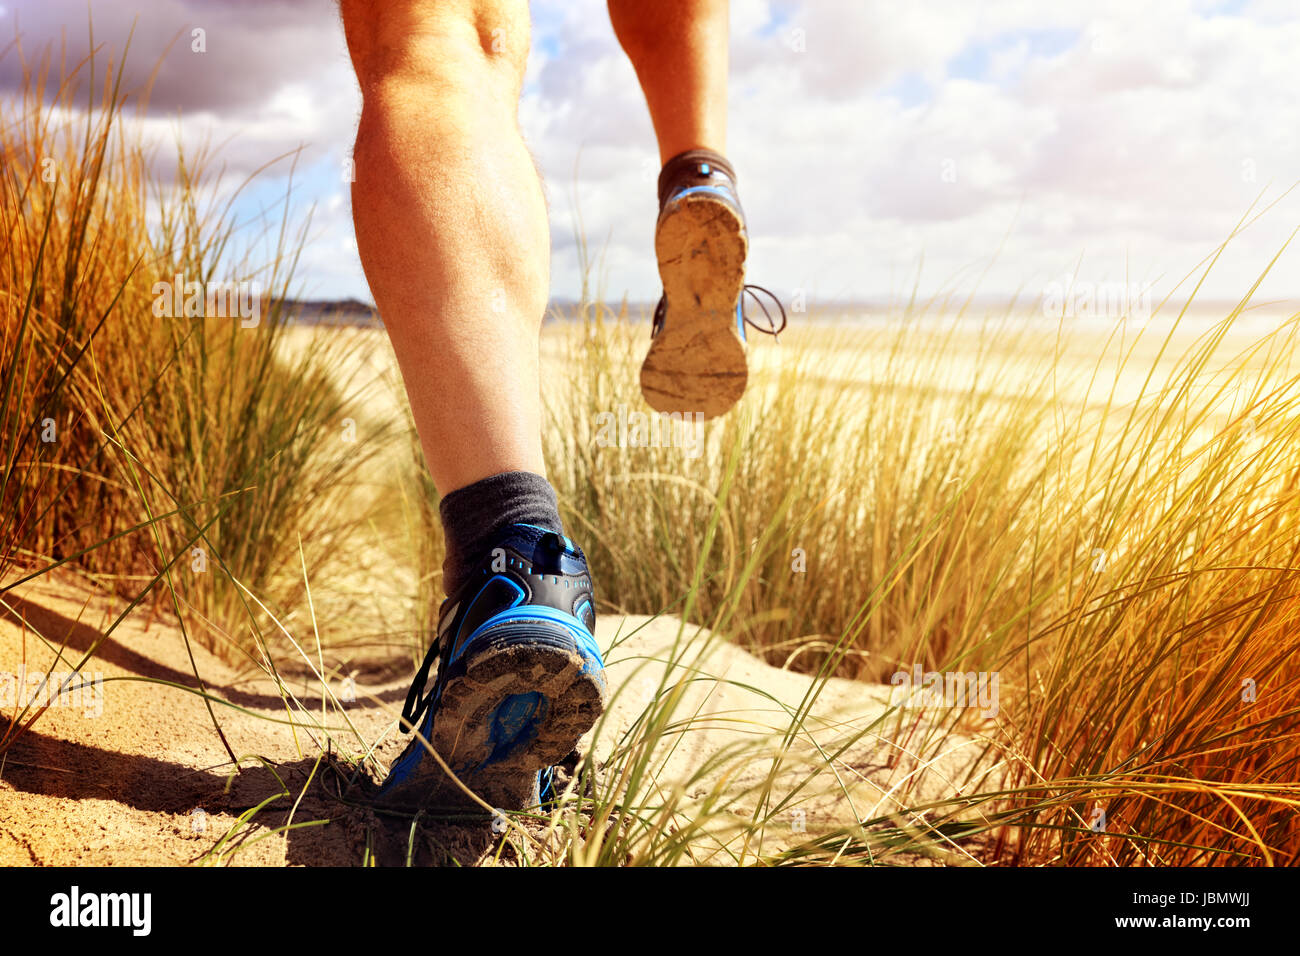 Fitness man running on the beach concept for exercising, fitness and healthy lifestyle Stock Photo